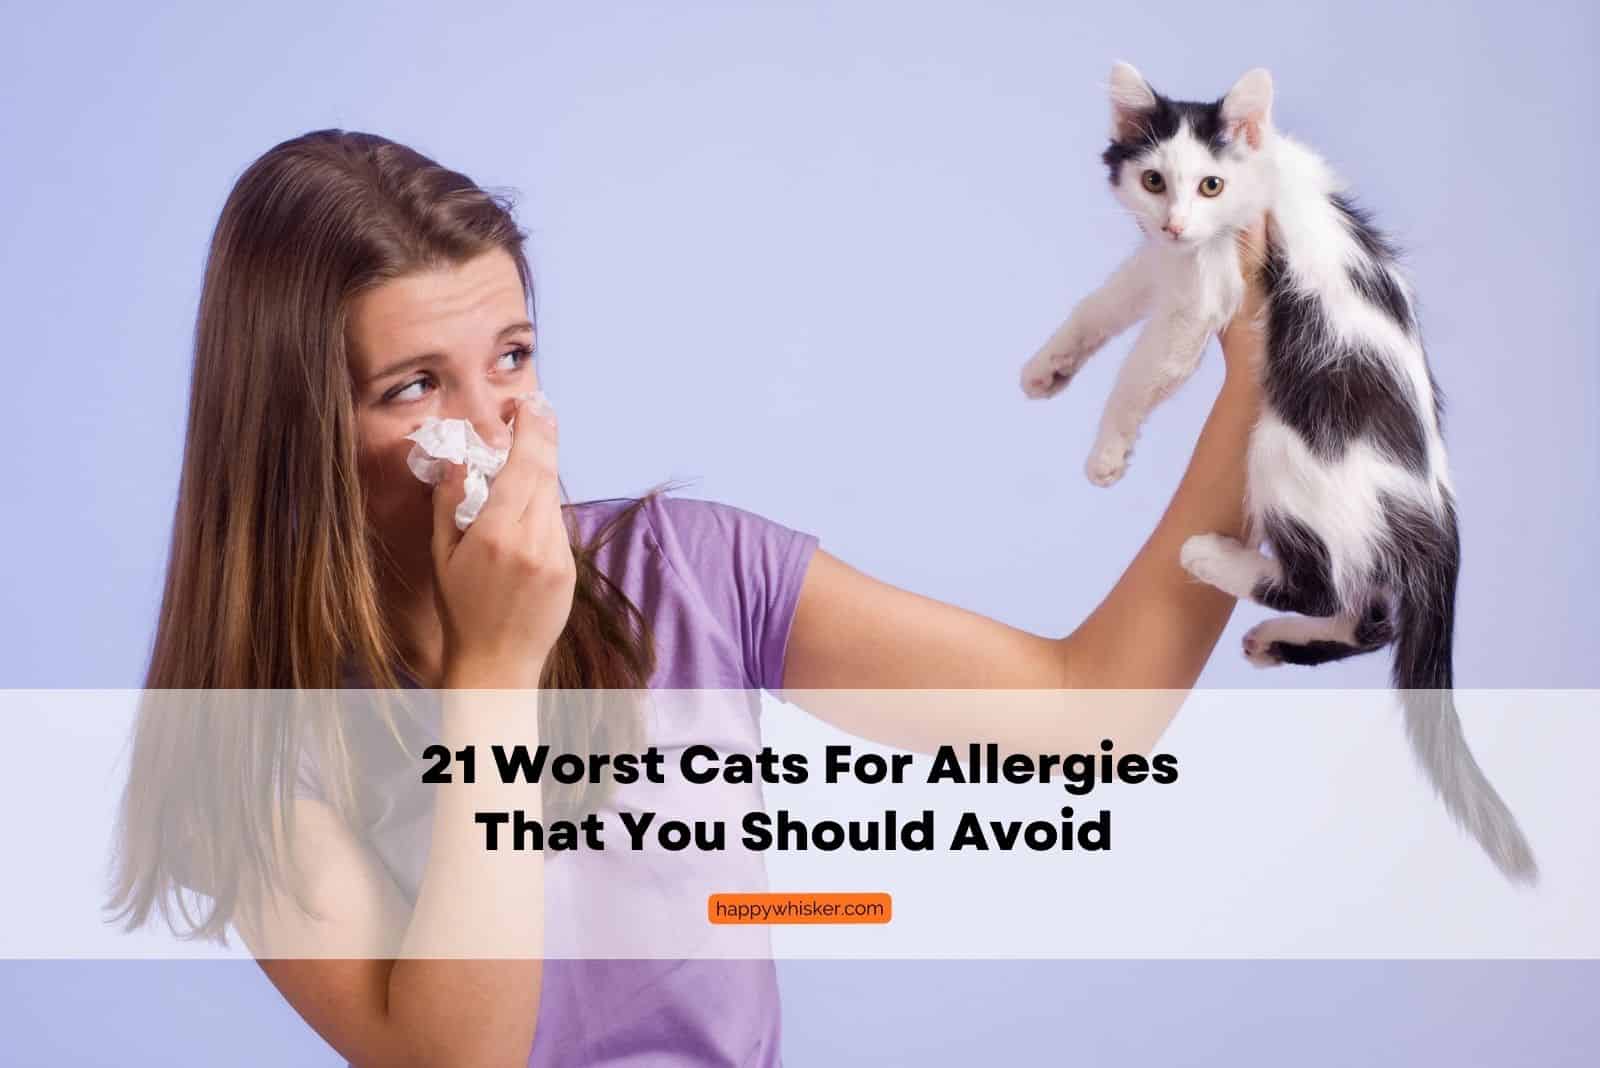 woman with allergies holding a black and white cat in her hand